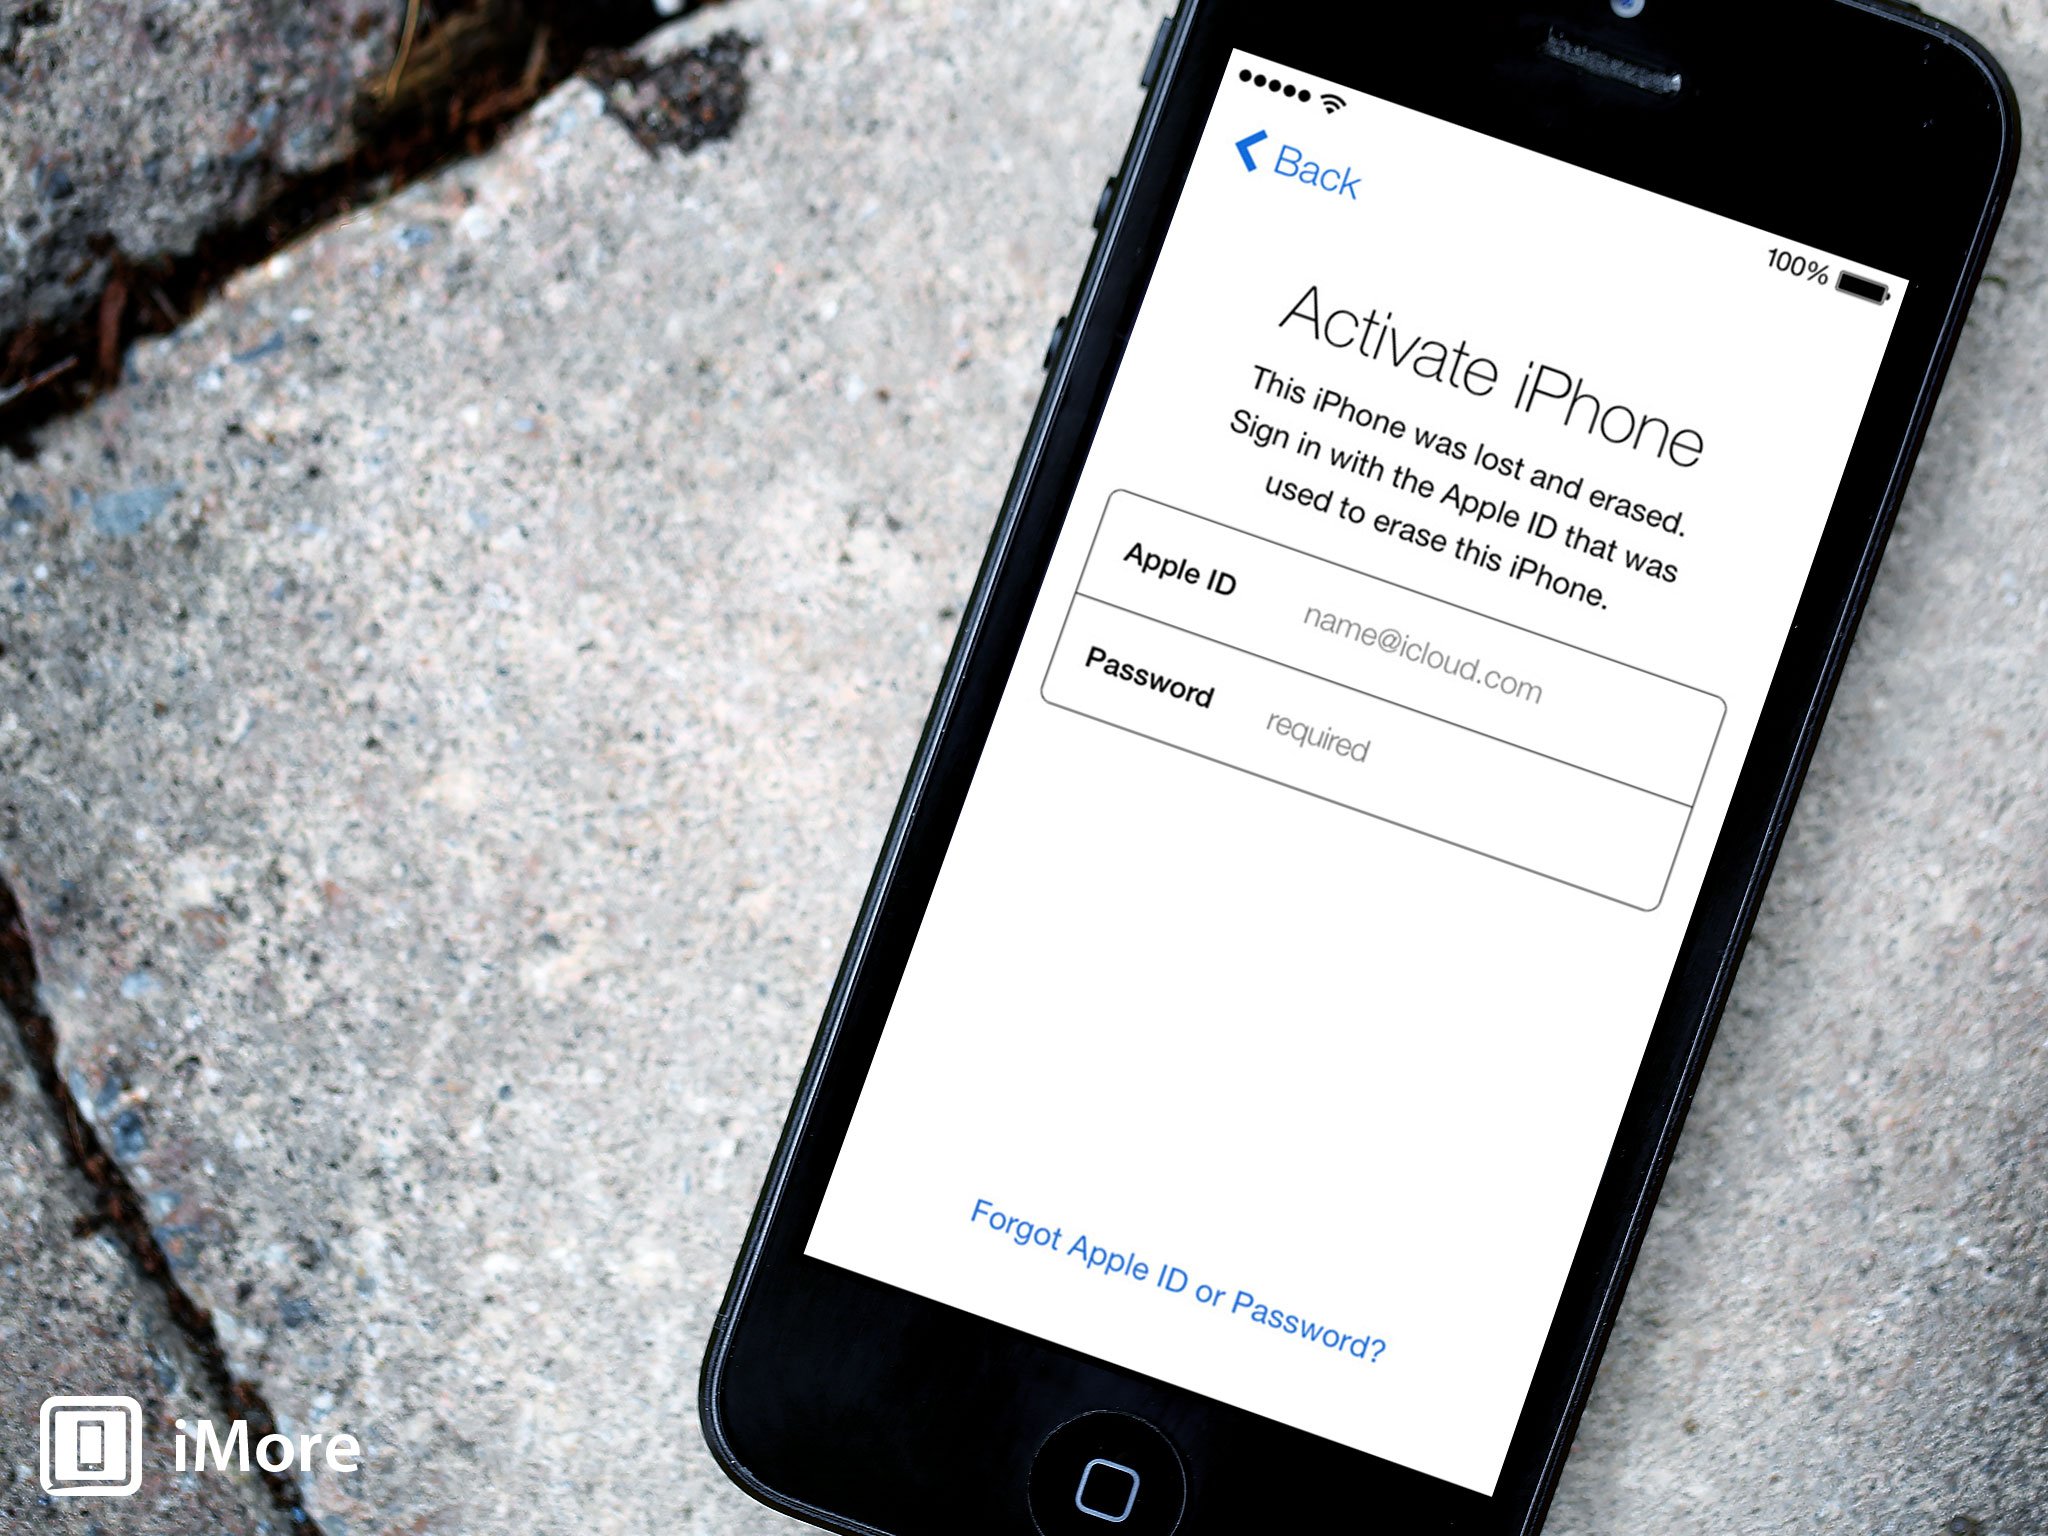 iOS 7 Activation Lock bypass discovered, protect yourself with Touch ID or Passcode